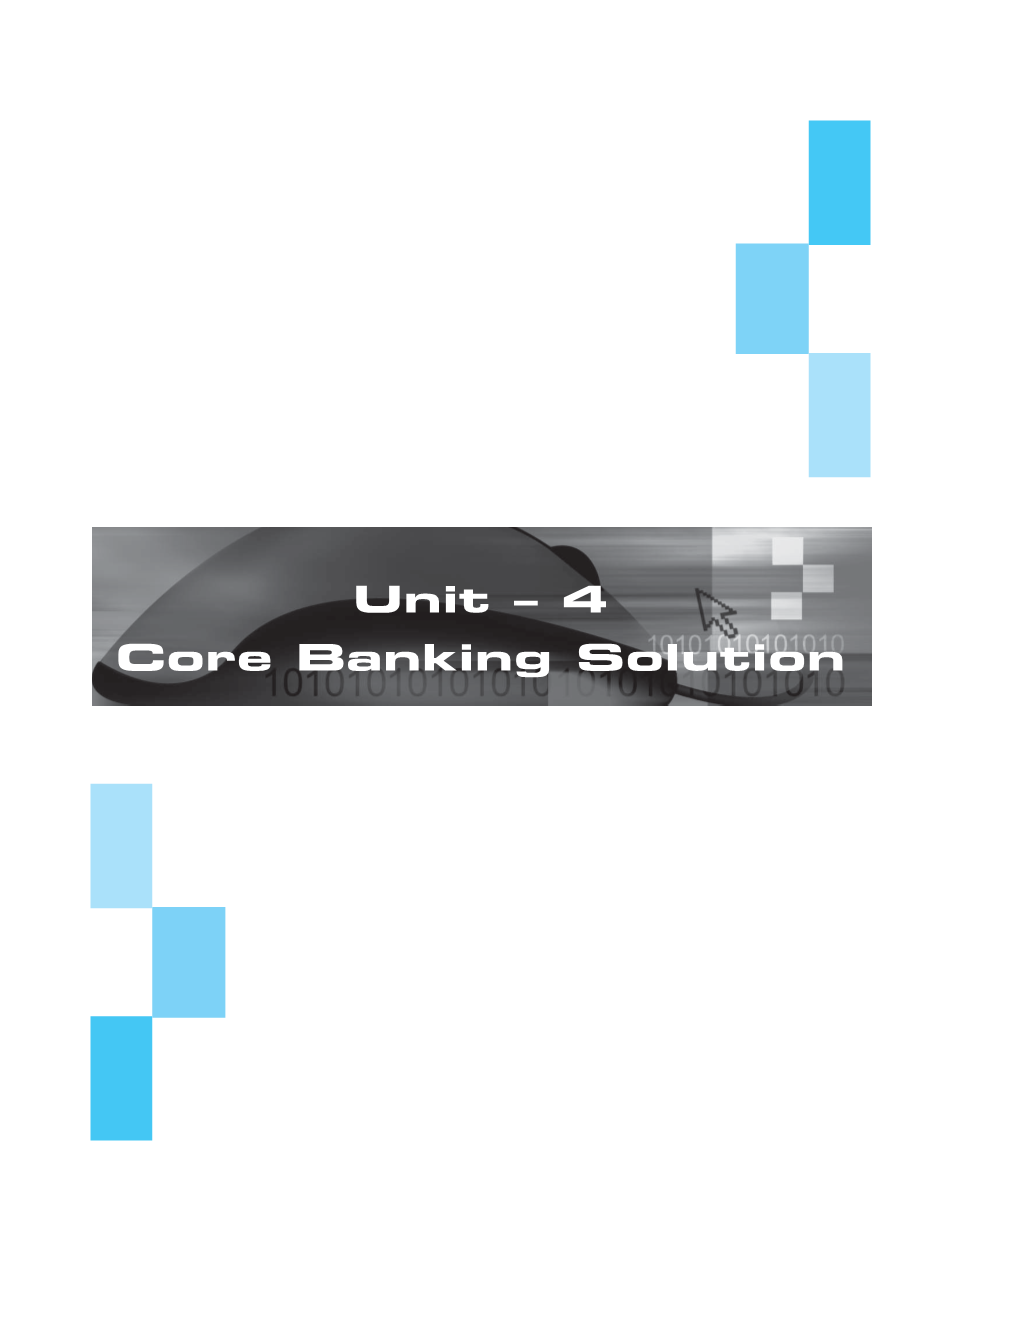 Unit – 4 Core Banking Solution Core Banking Solution